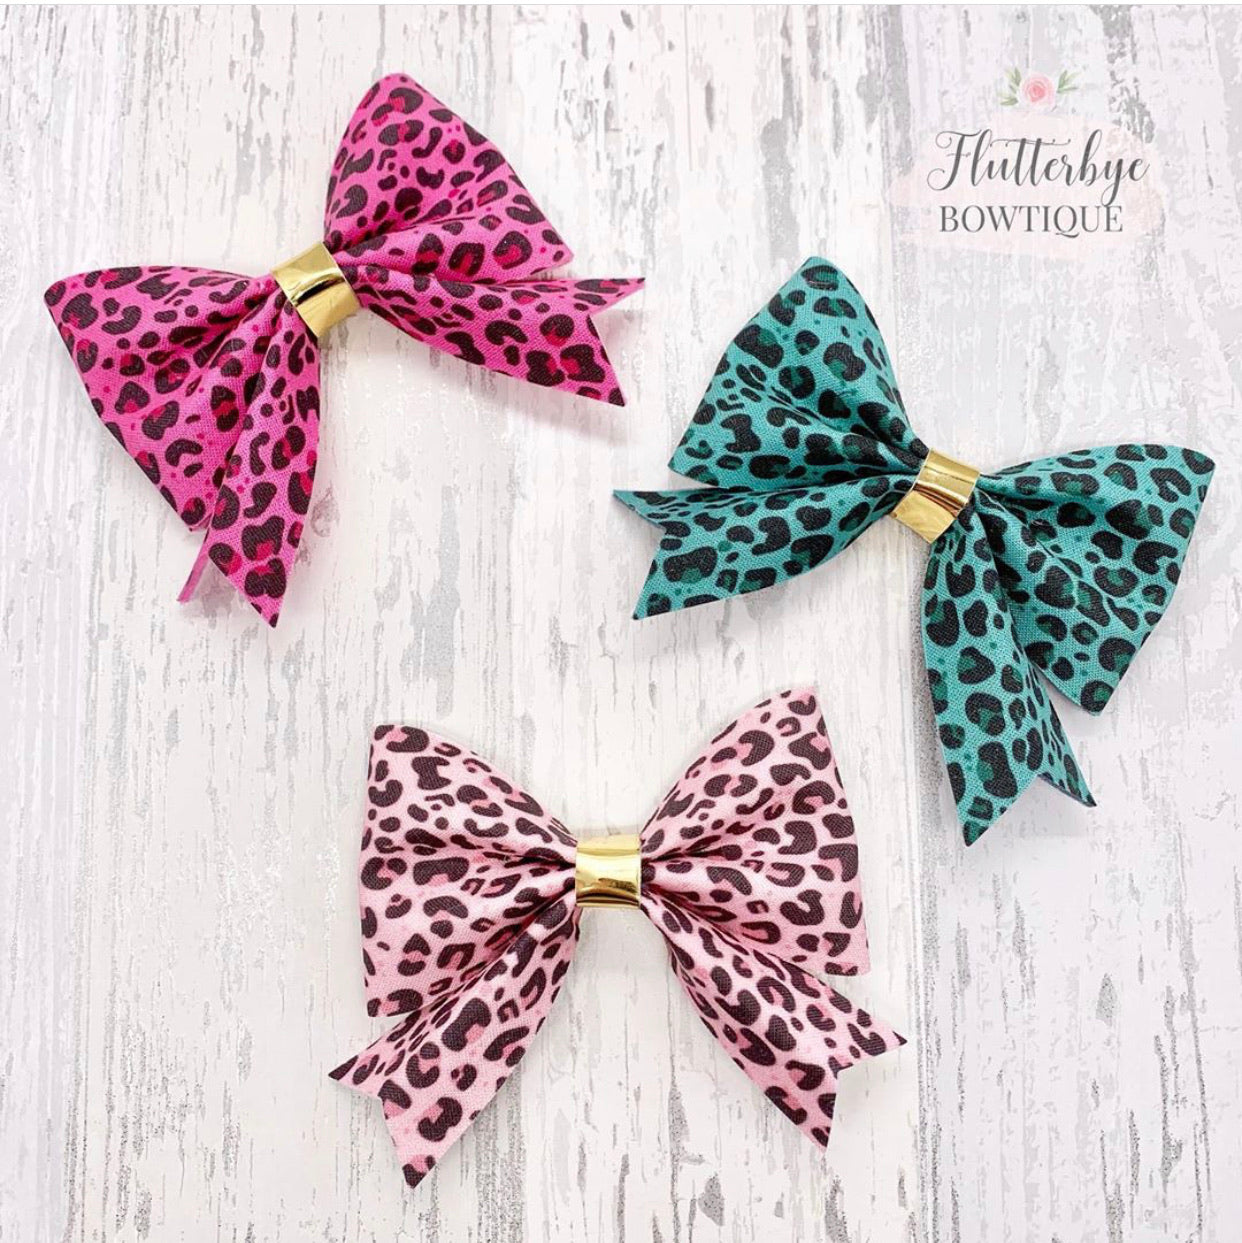 The Cutie Pie Bow Templates- 3 sizes available